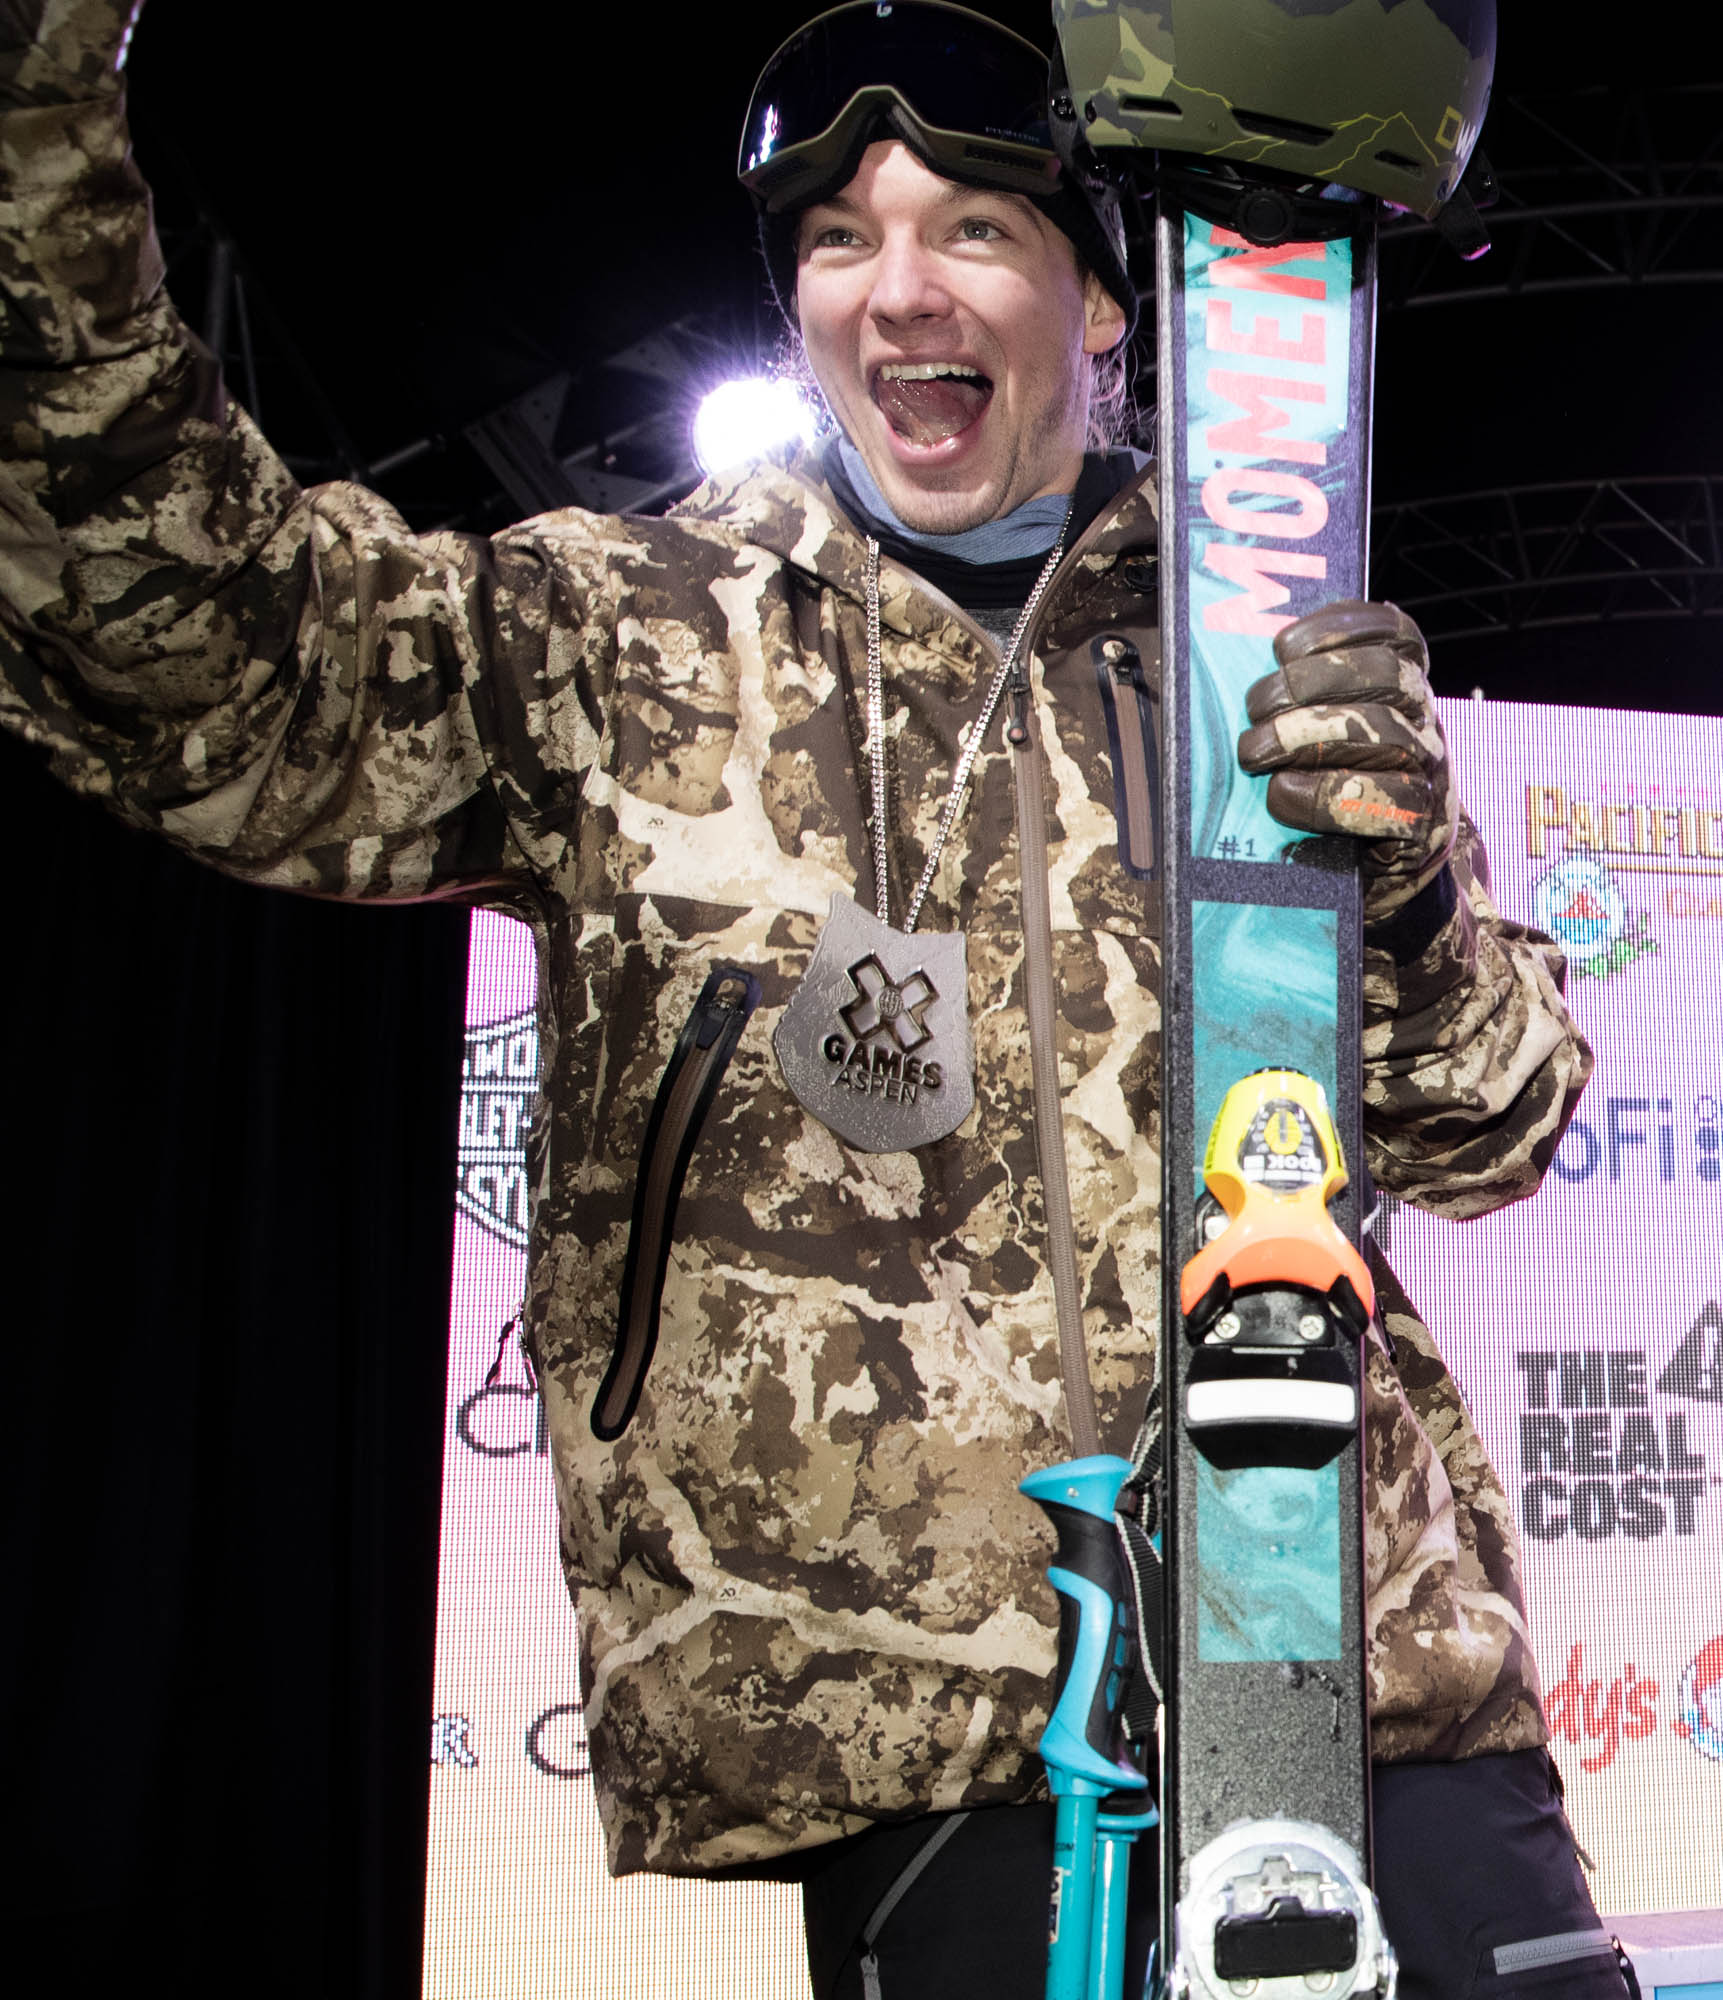 Monster Energy's David Wise Will Compete at X Games Aspen 2020 in Men's Ski SuperPipe